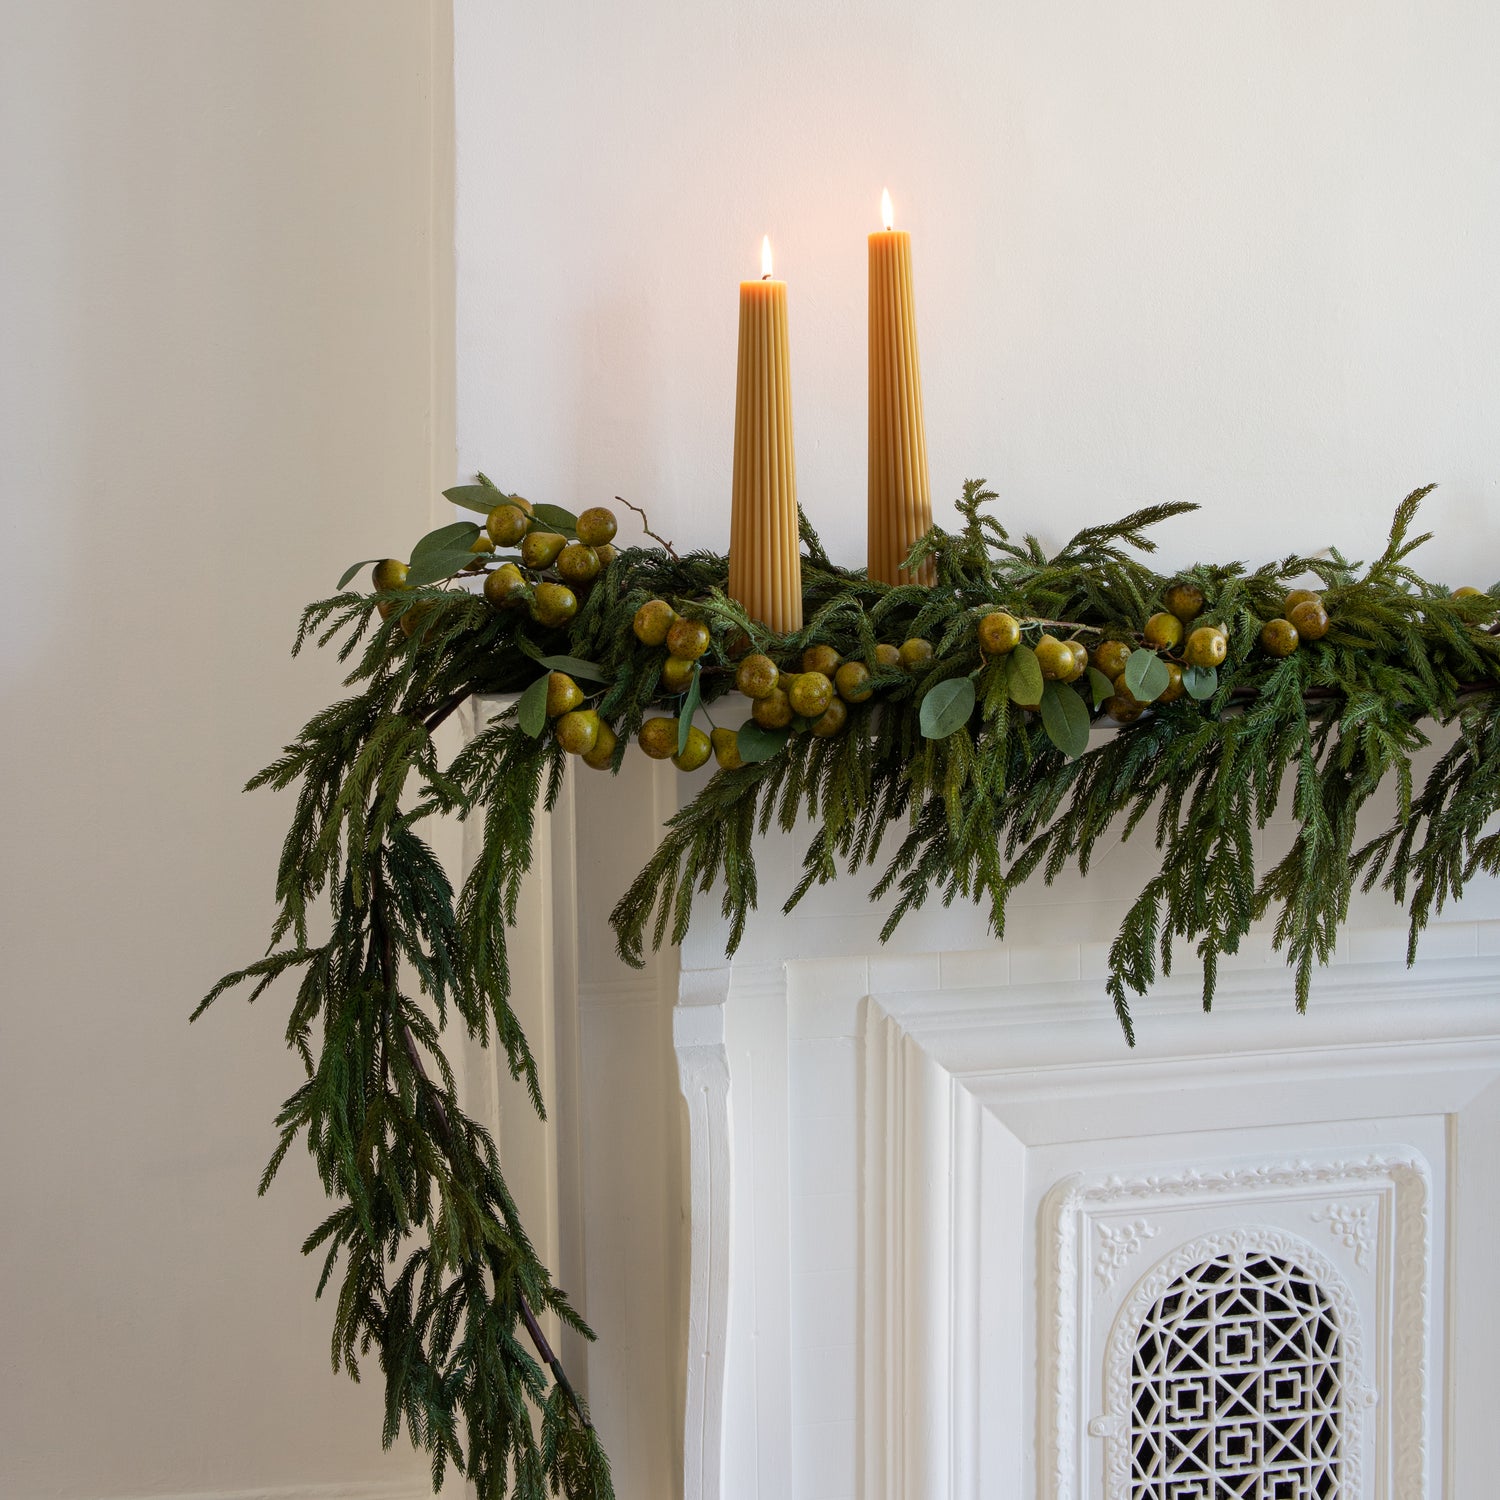 Shop for Norfolk Pine Christmas Garland and Wreaths